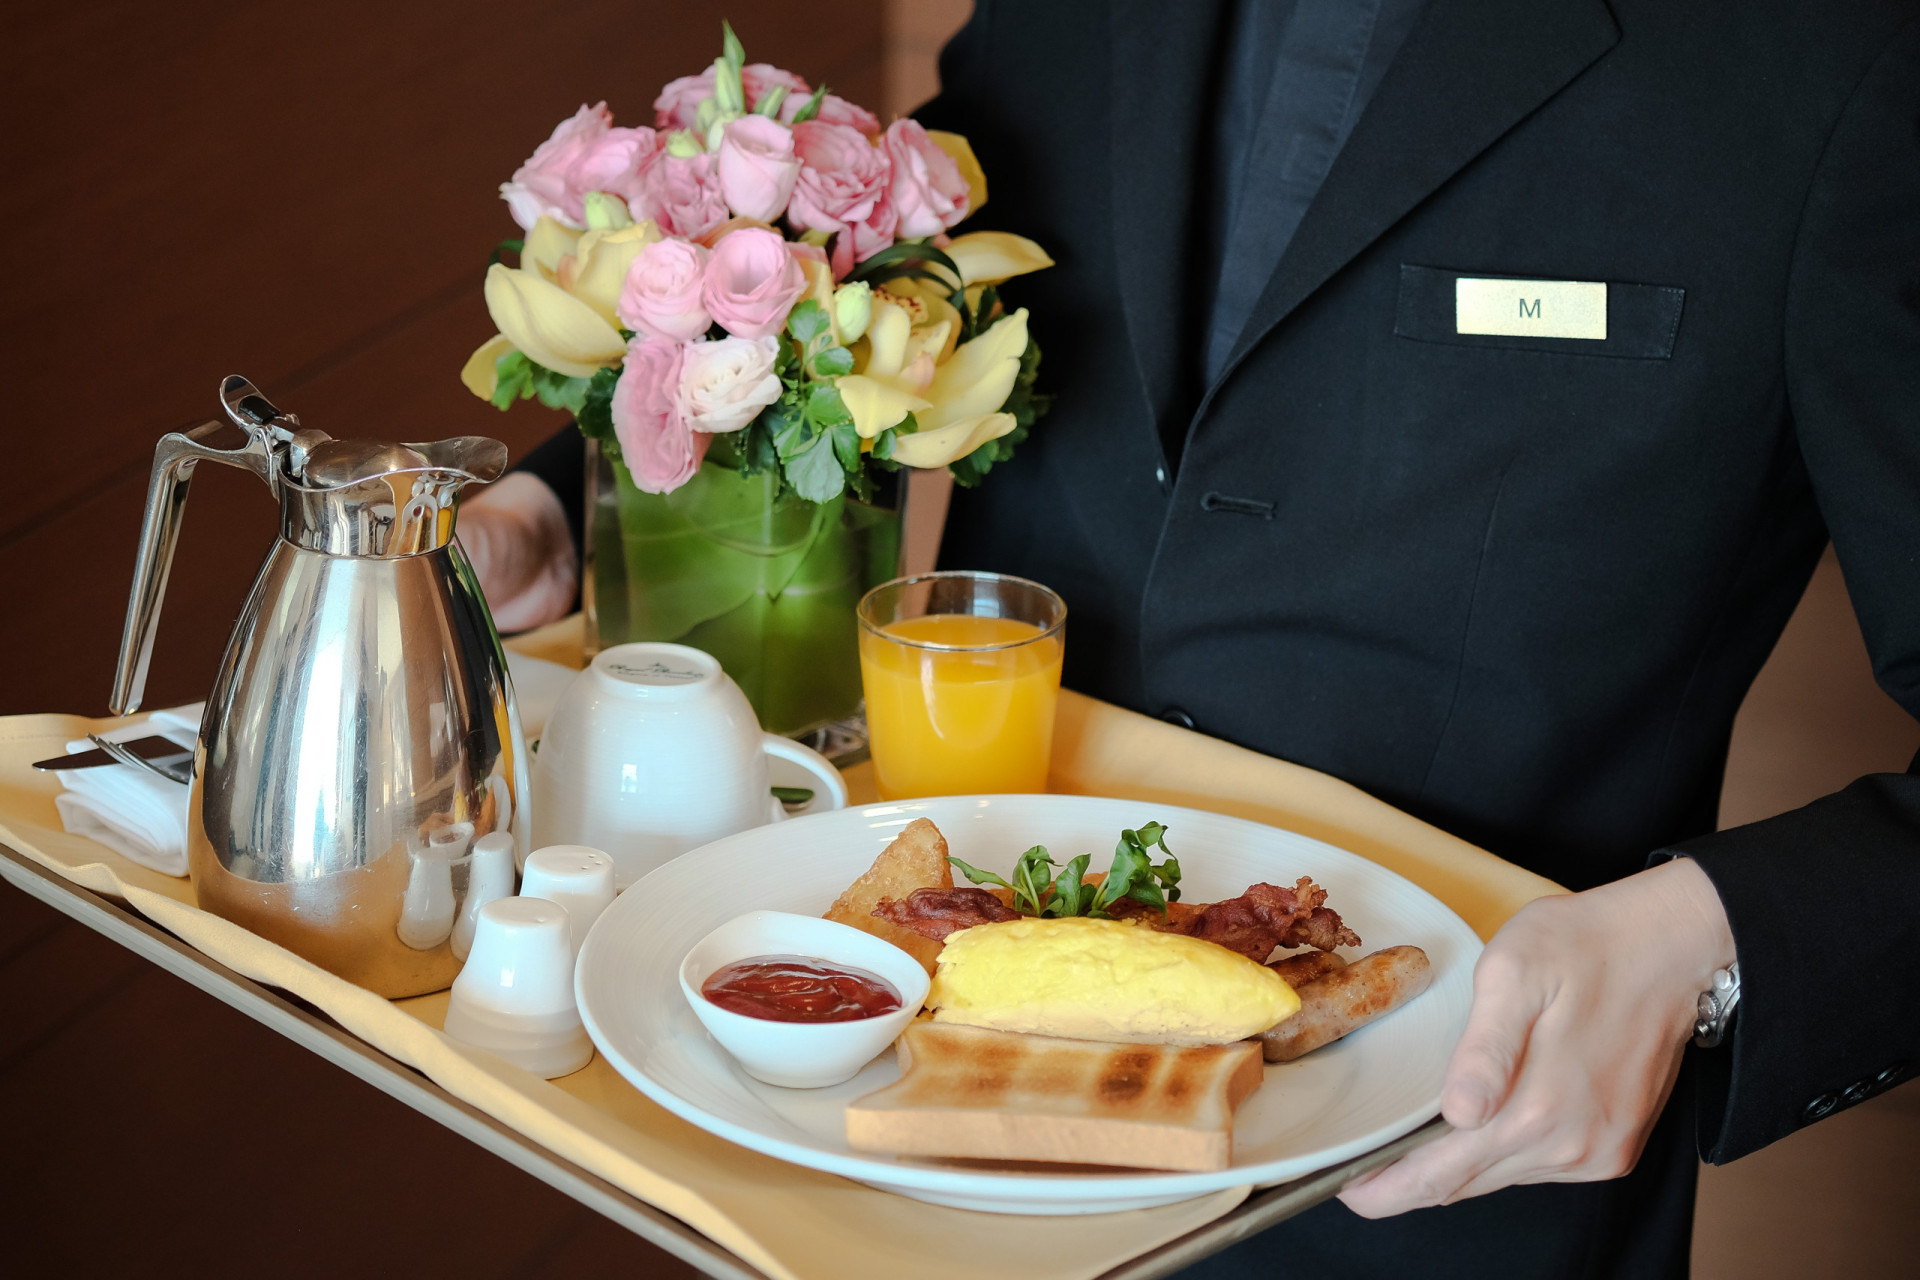 <p>Is room service included, and can you eat and drink what you want 24 hours a day?</p><p><a href="https://www.msn.com/en-us/community/channel/vid-7xx8mnucu55yw63we9va2gwr7uihbxwc68fxqp25x6tg4ftibpra?cvid=94631541bc0f4f89bfd59158d696ad7e">Follow us and access great exclusive content every day</a></p>